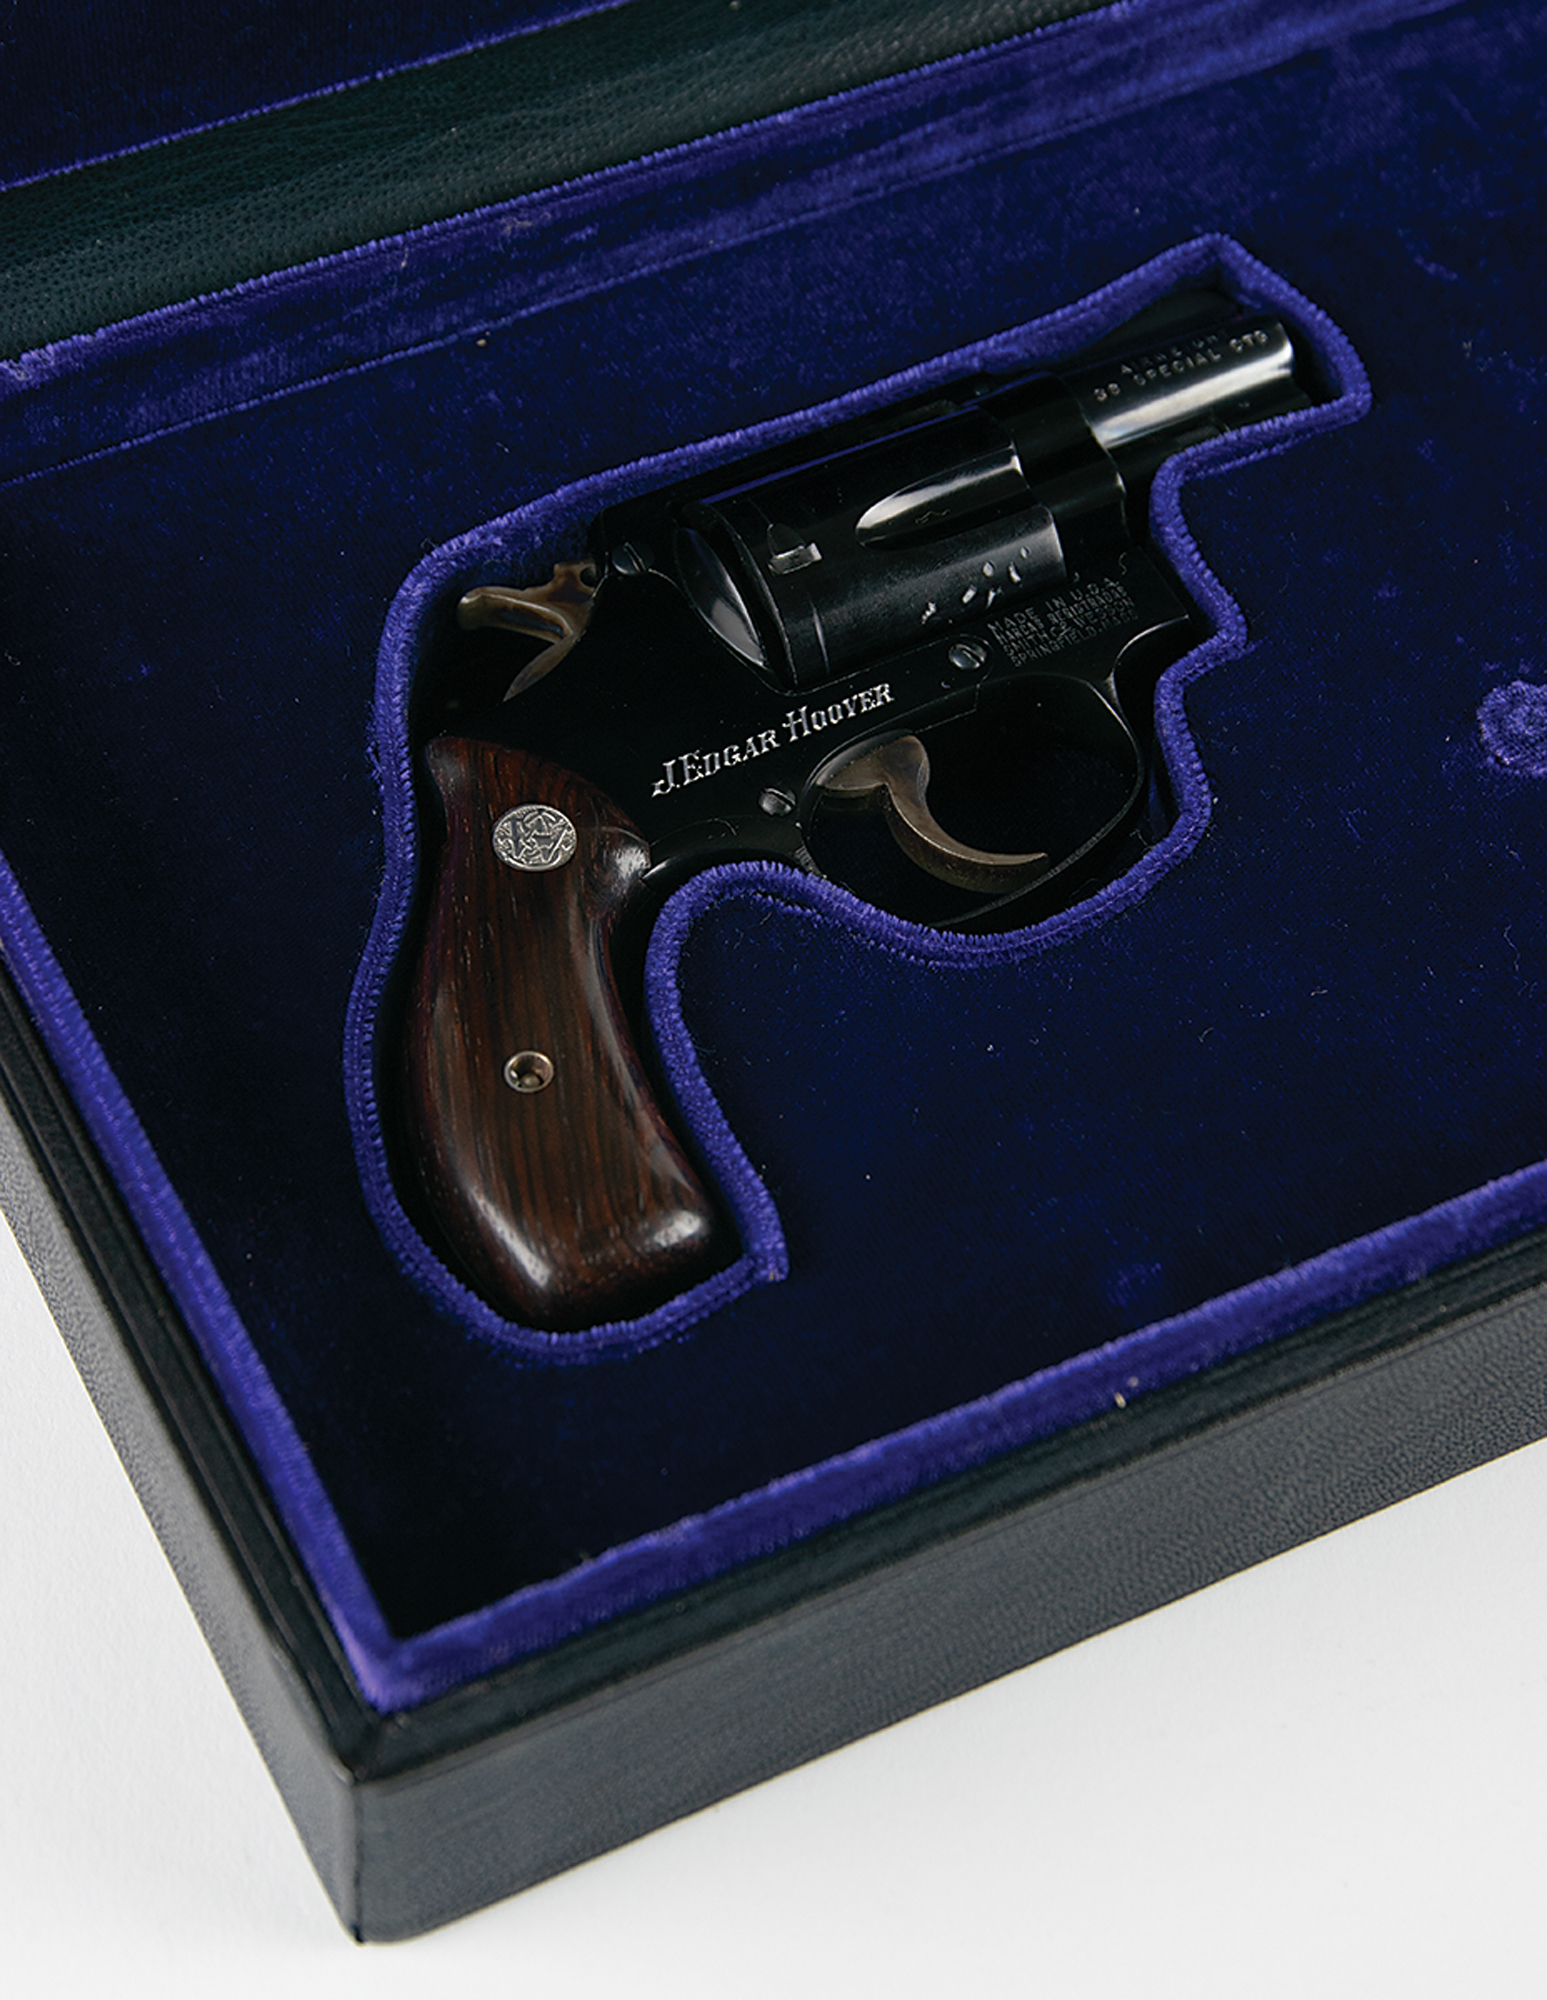 J. Edgar Hoover's Smith & Wesson .38 Chief's Special